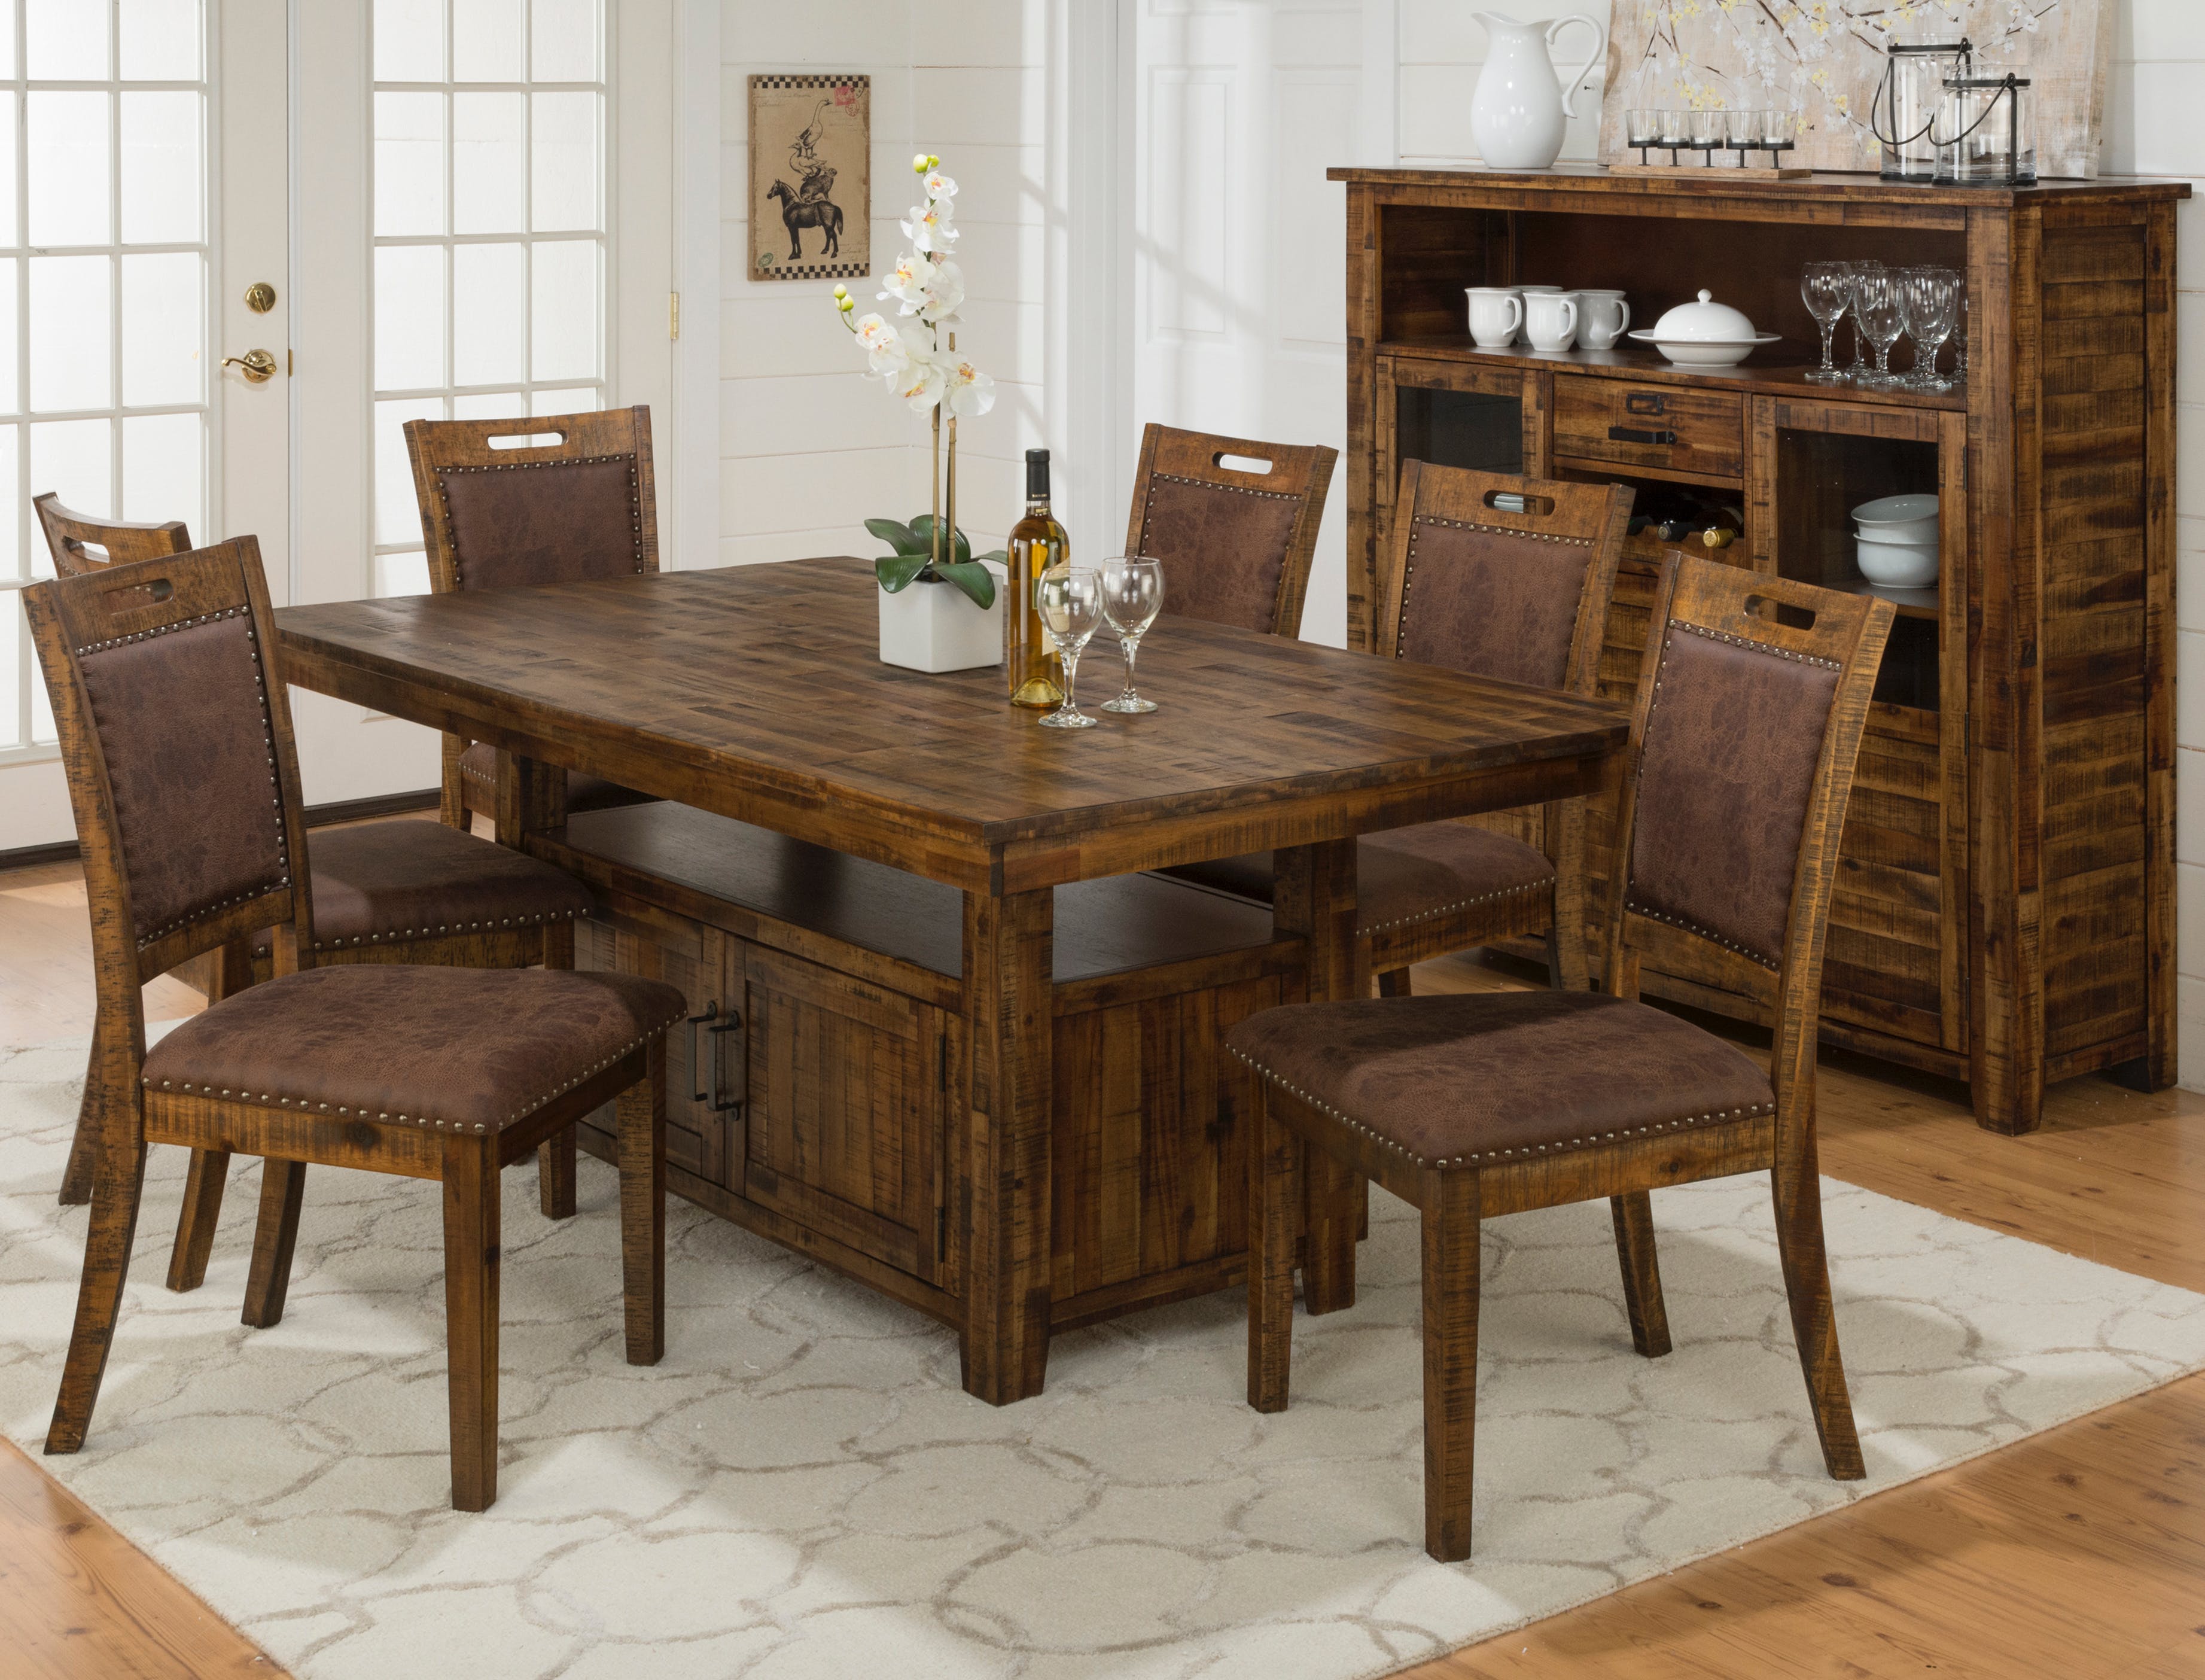 Jofran Furniture Cannon dining set, 4 chairs, & 2 chairs free of charge VKZURXK